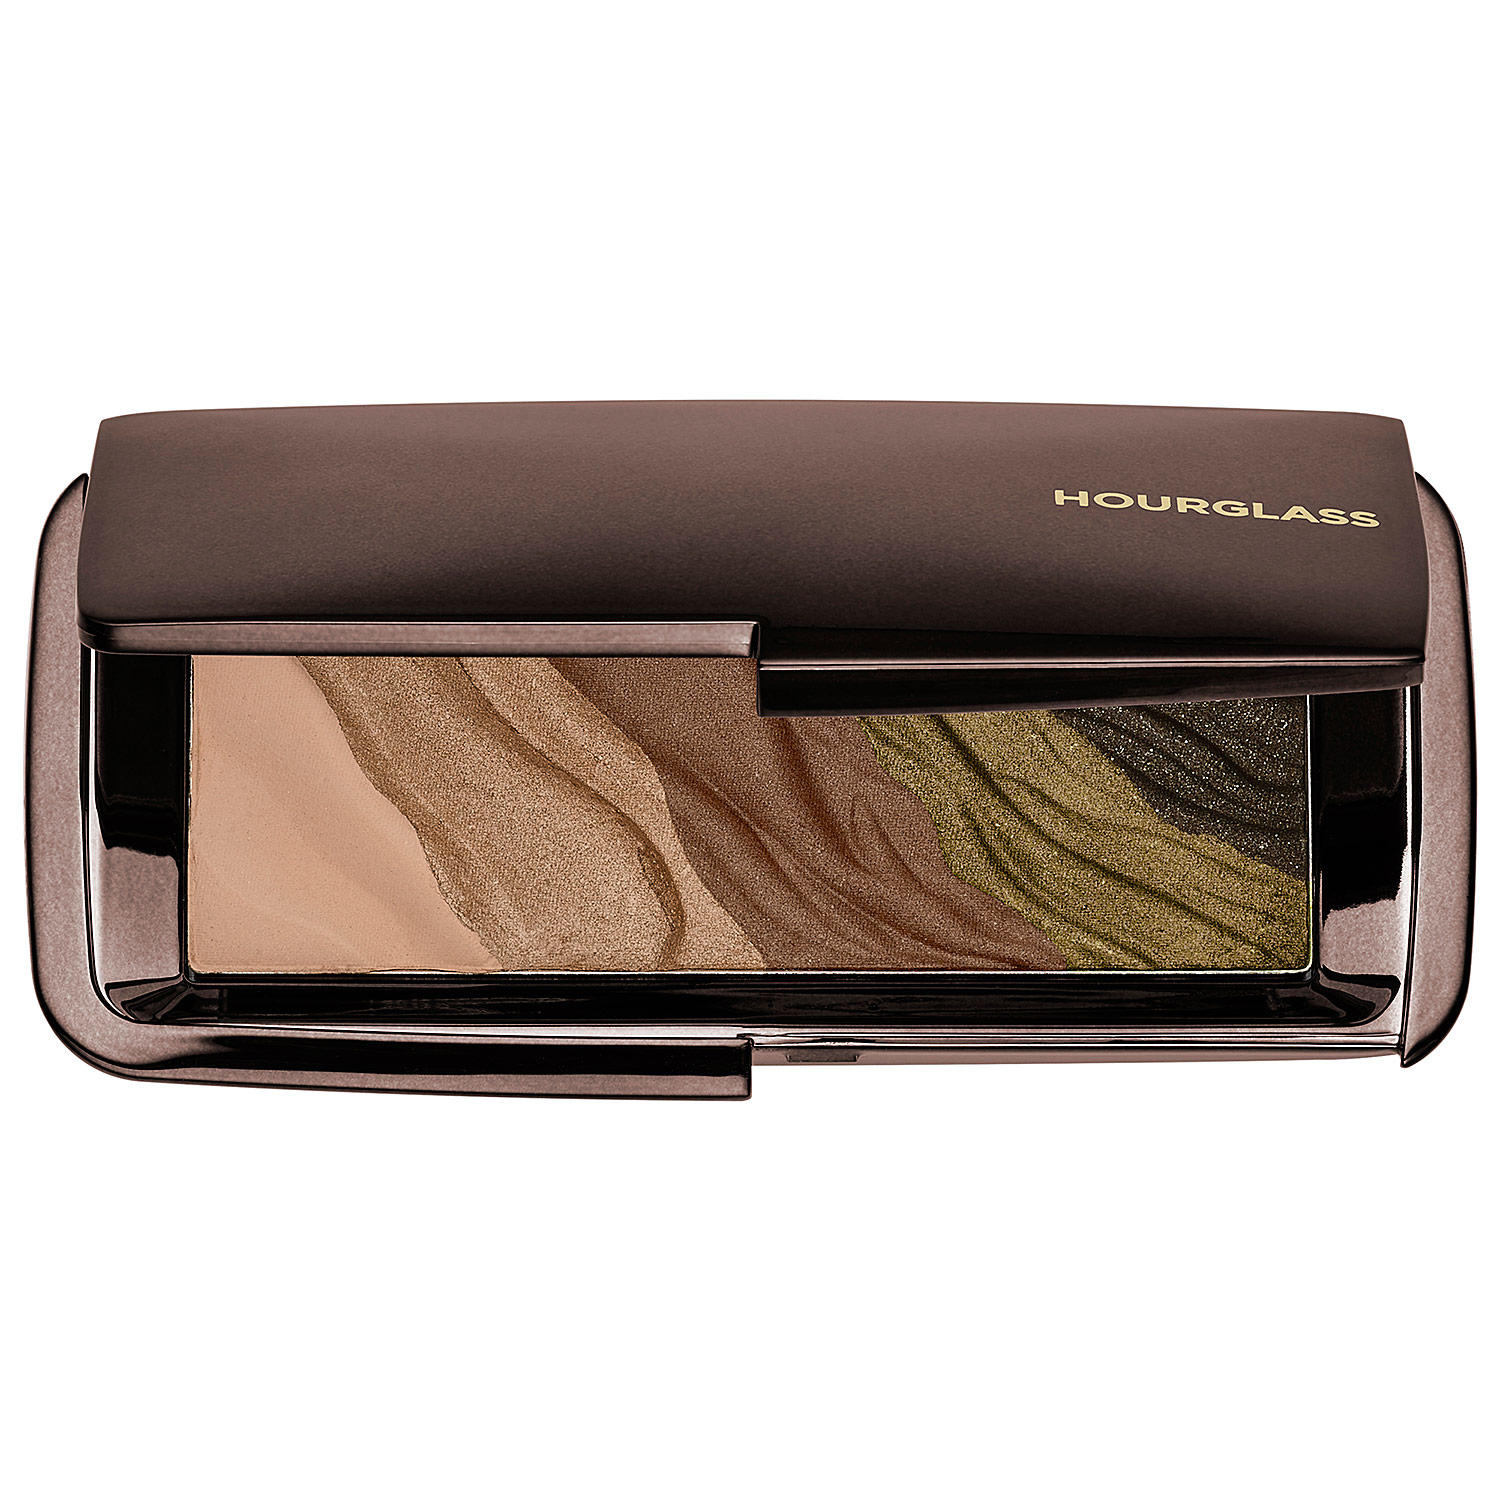 Hourglass Modernist Eyeshadow Palette Color Field